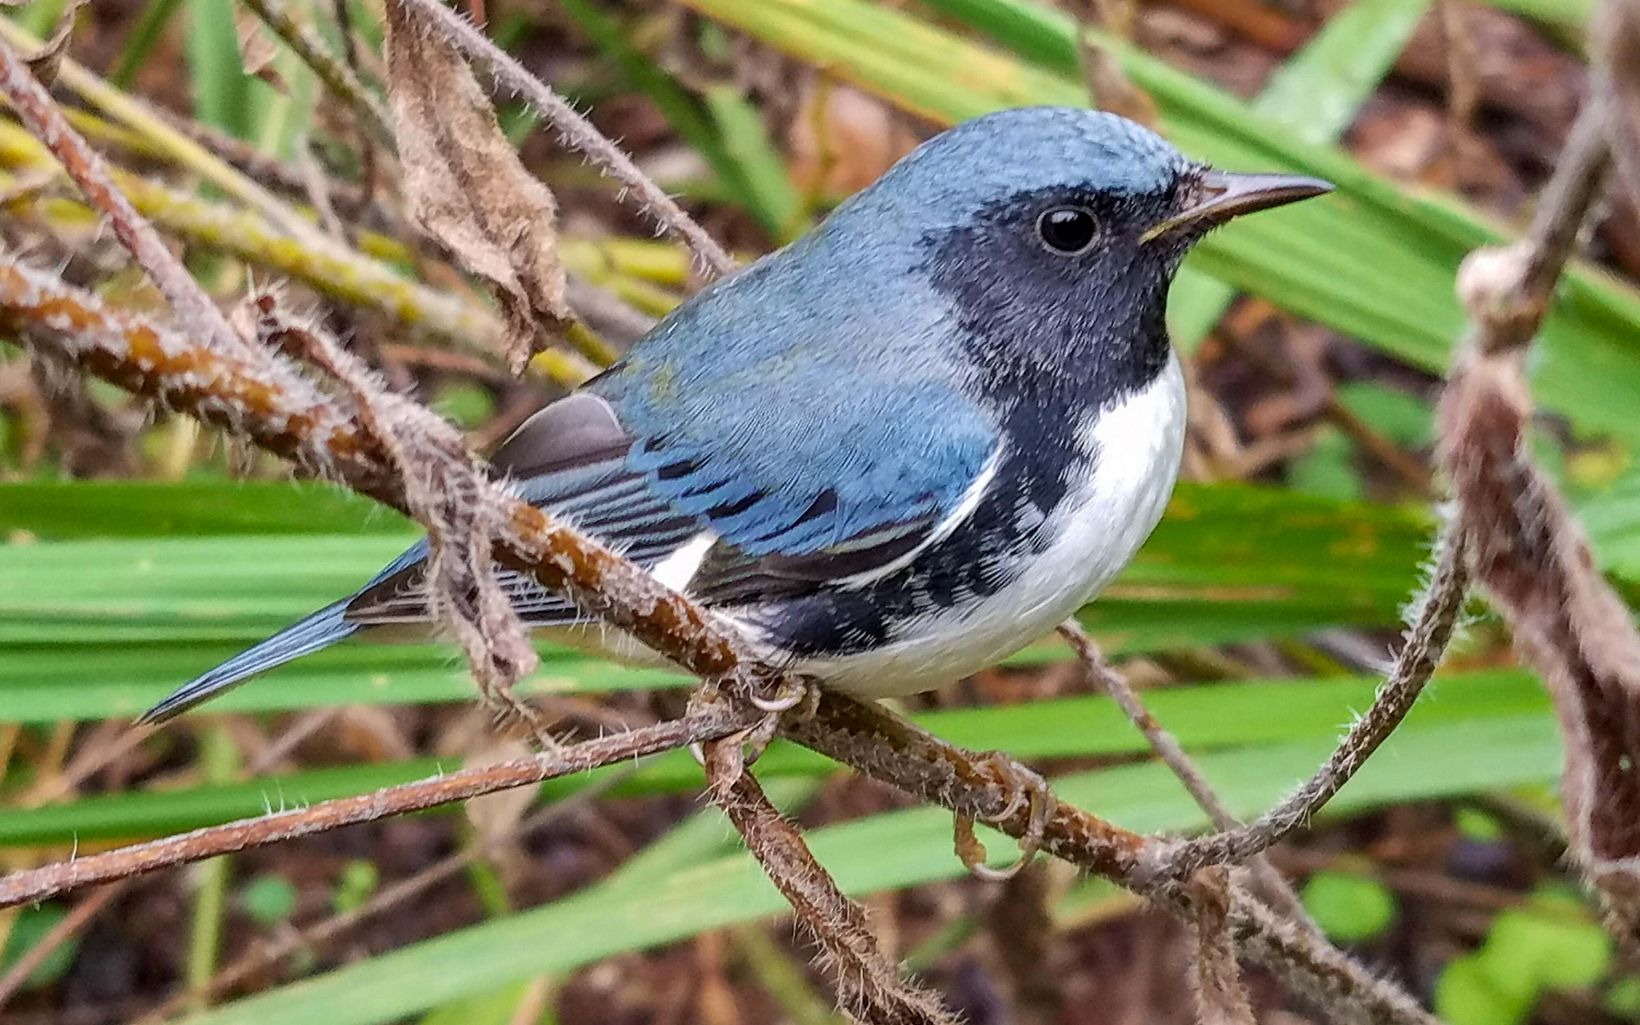 A male black-throated blue warbler sitting on the forest floor.